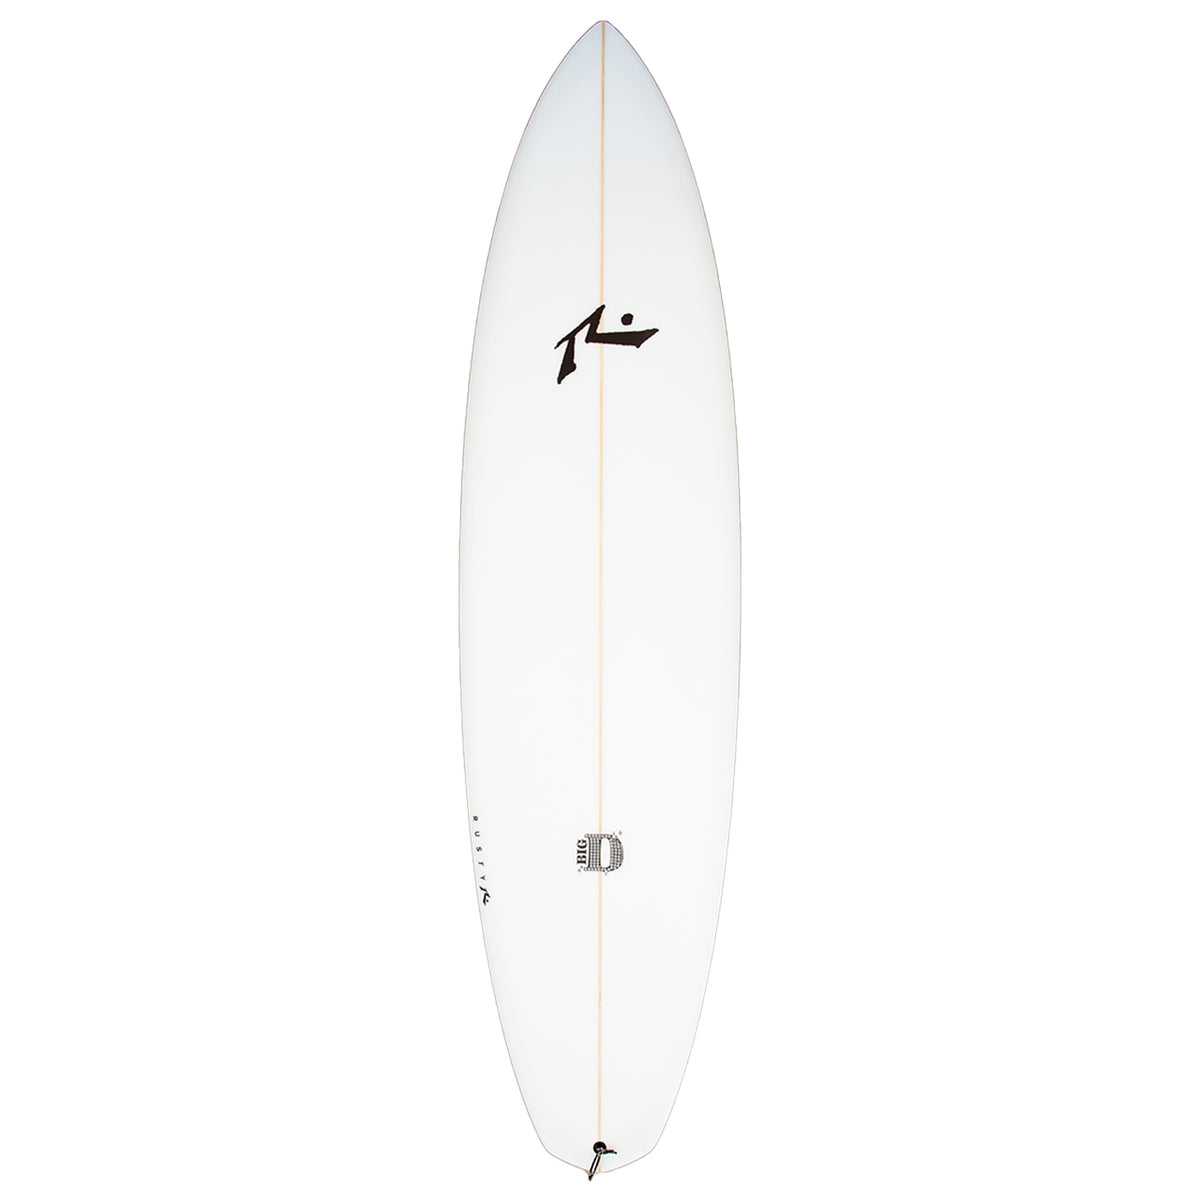 Big D Midlength - Deck View - Rusty Surfboards - Made To Order